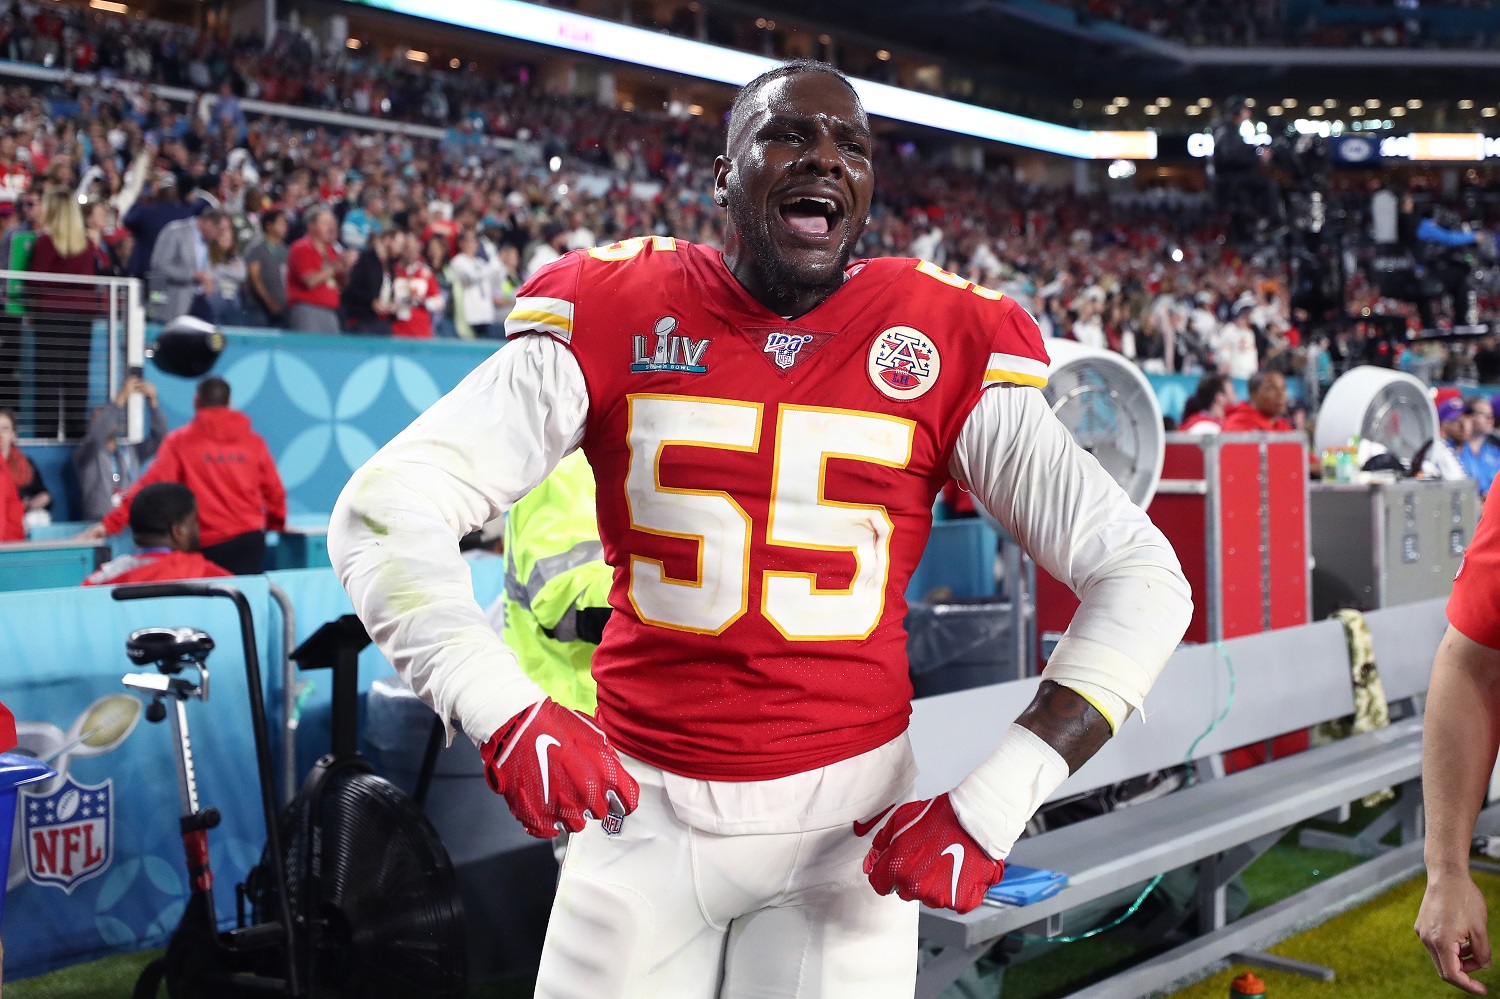 Kansas City Chiefs defensive end Frank Clark reacts after defeating San Francisco 49ers in Super Bowl 54 at Hard Rock Stadium in Miami,.